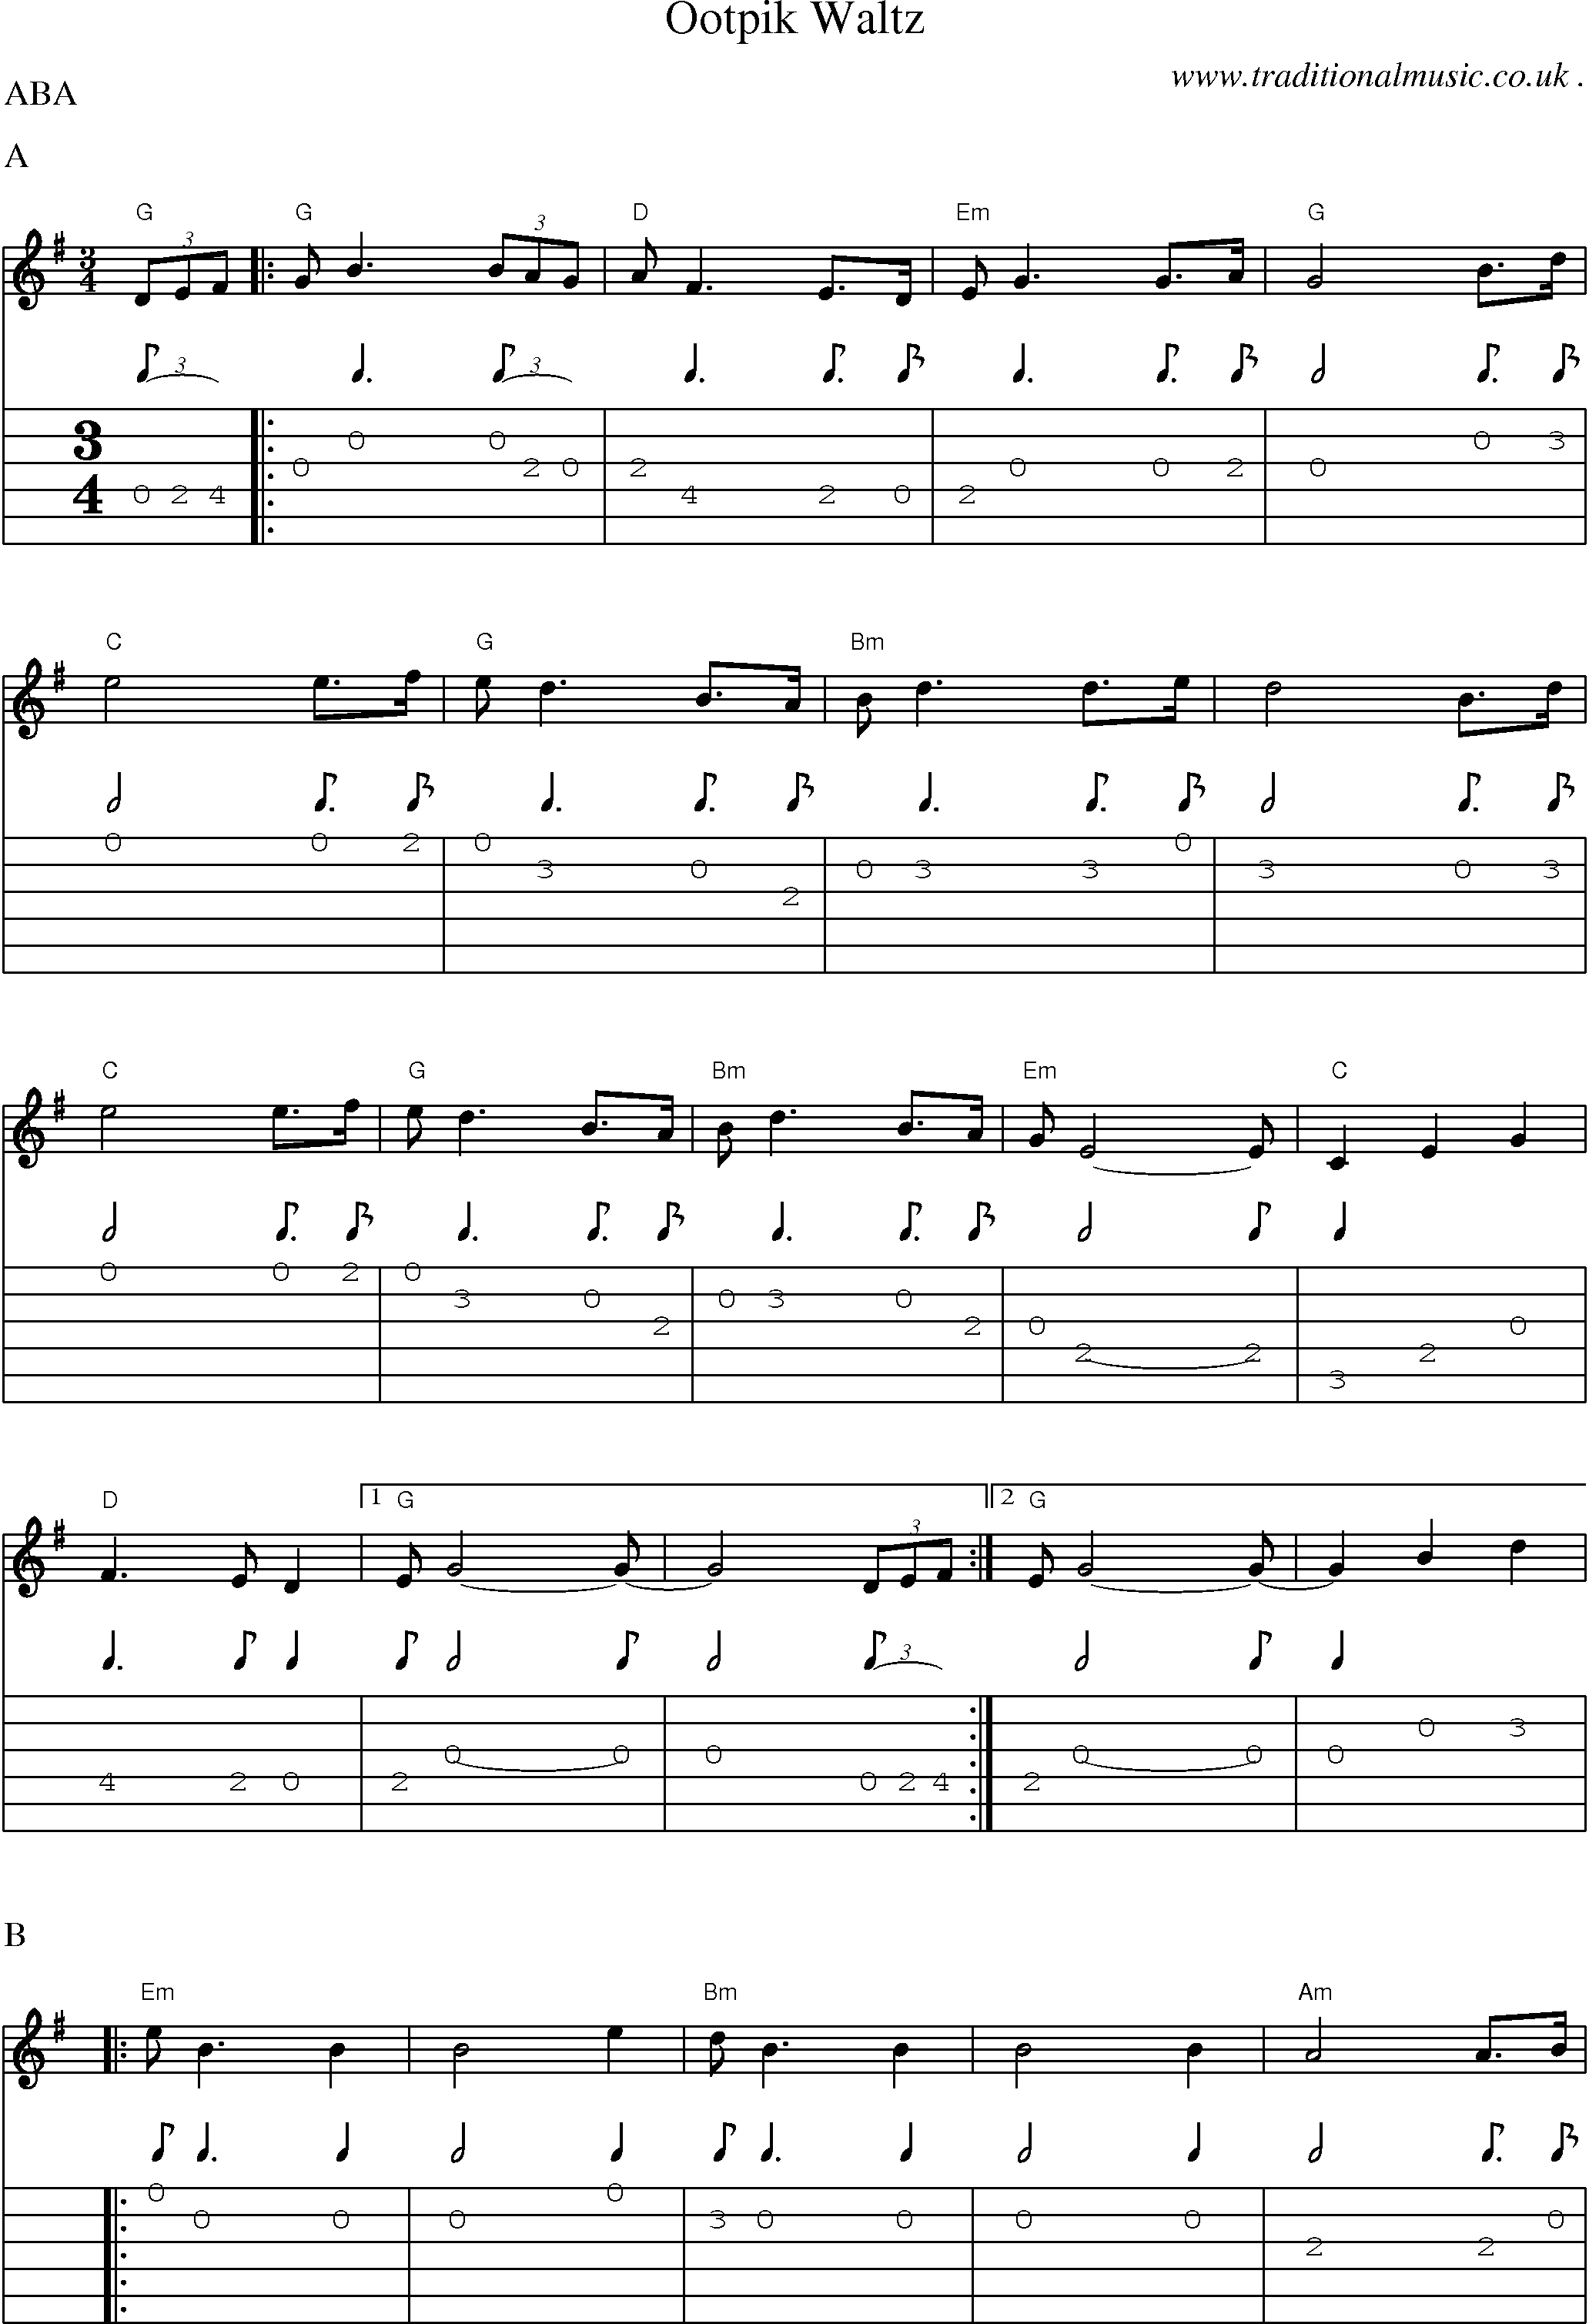 Music Score and Guitar Tabs for Ootpik Waltz